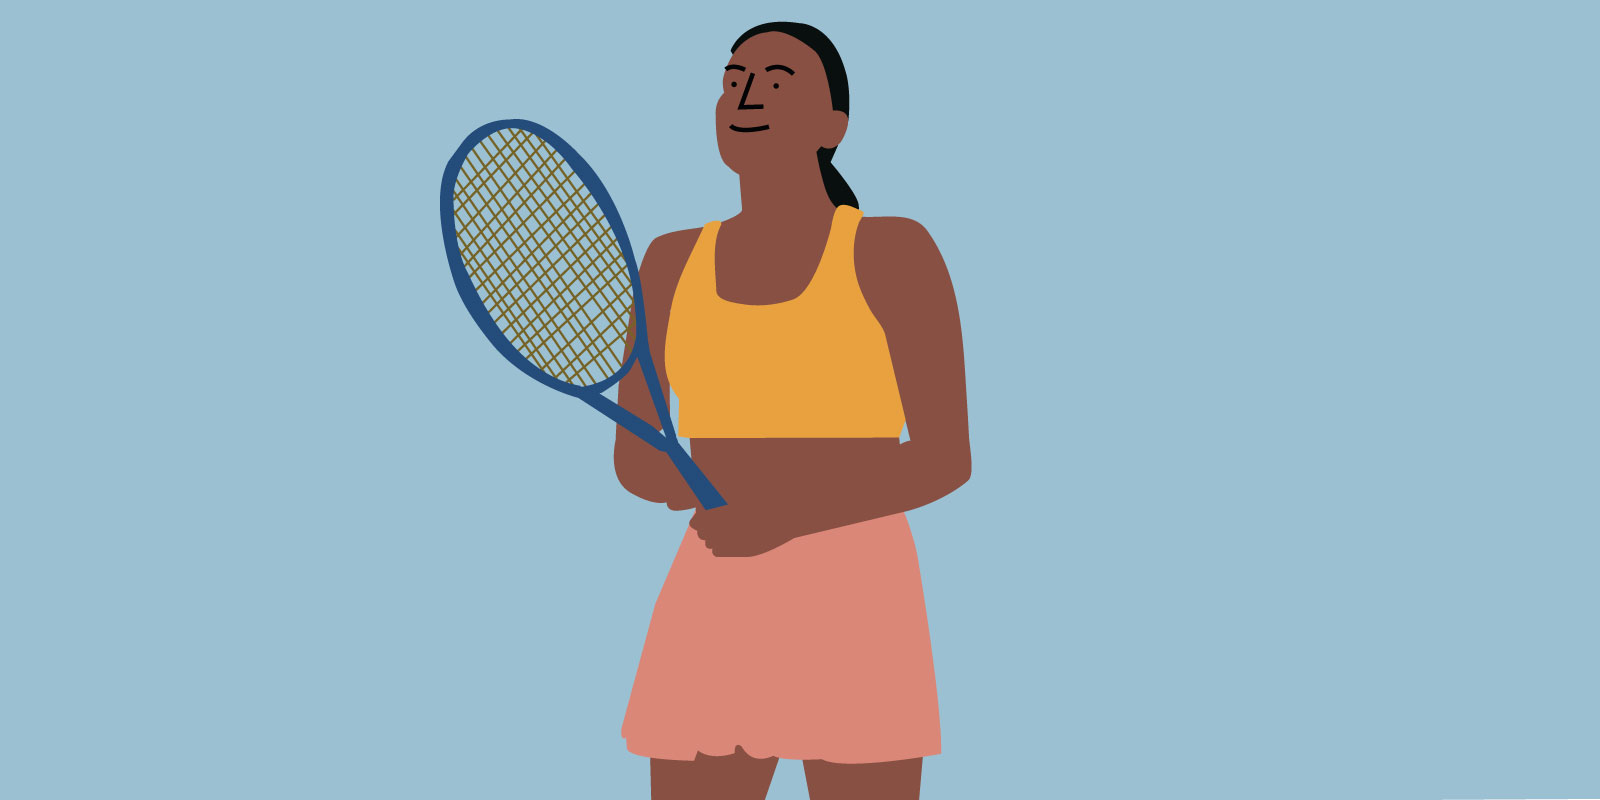 Sleep and exercise: A woman playing tennis.